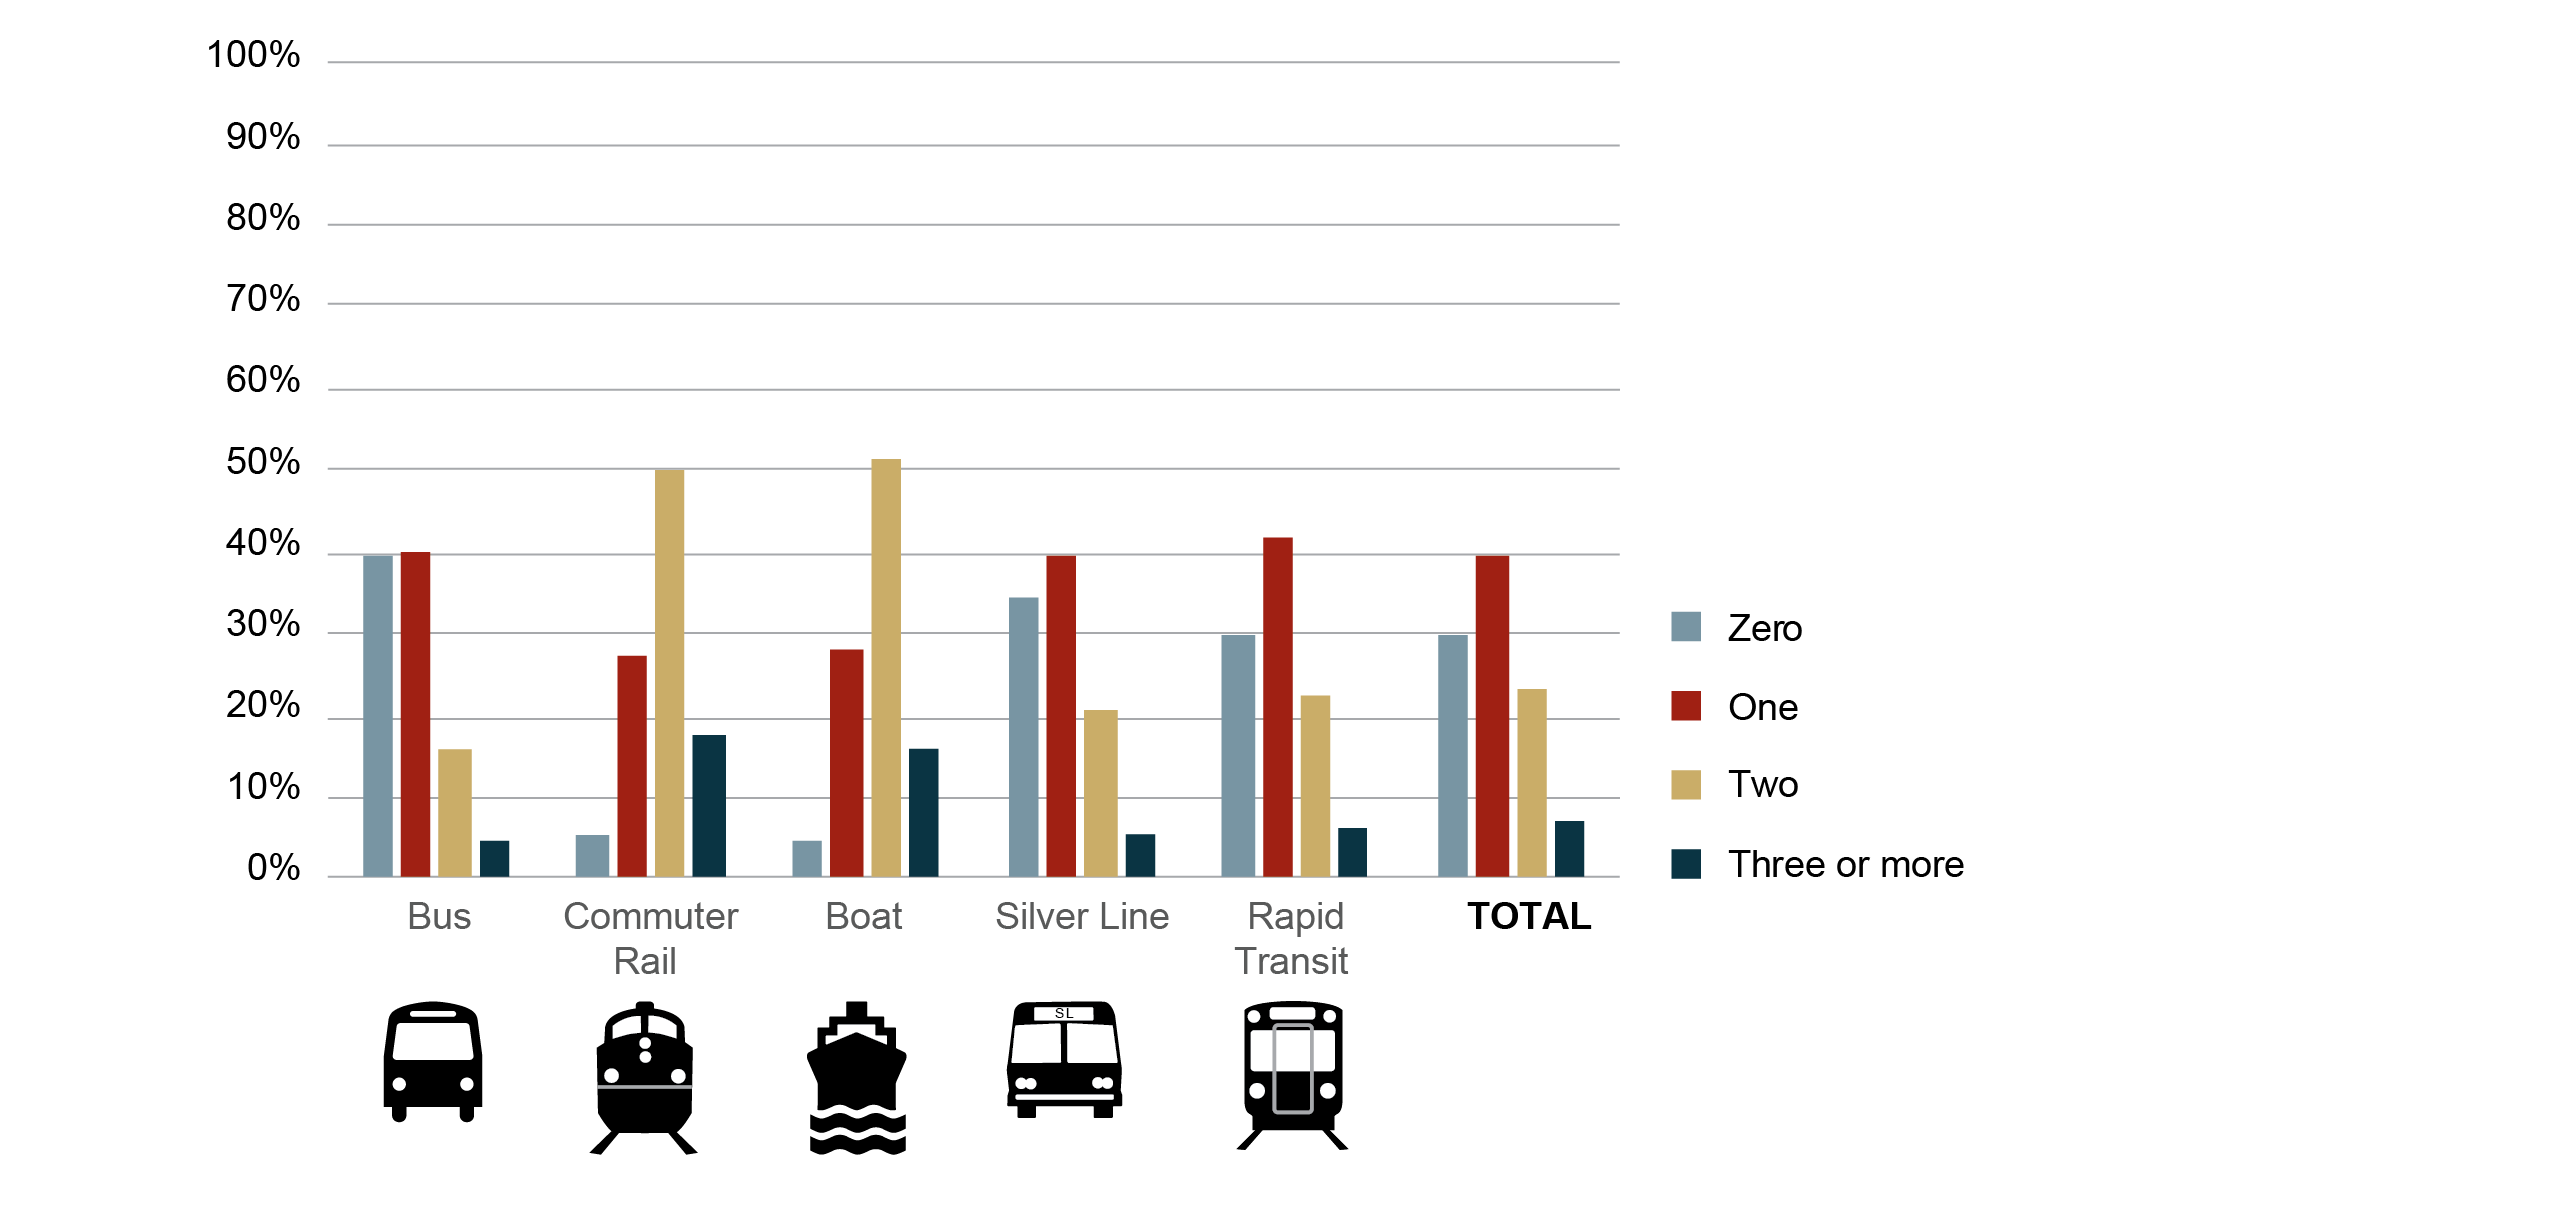 Figure 21 is a series of bar graphs showing the percentage distributions of ranges of number of usable vehicles in the households of passengers using each MBTA service mode as reported in the 2015-17 survey.